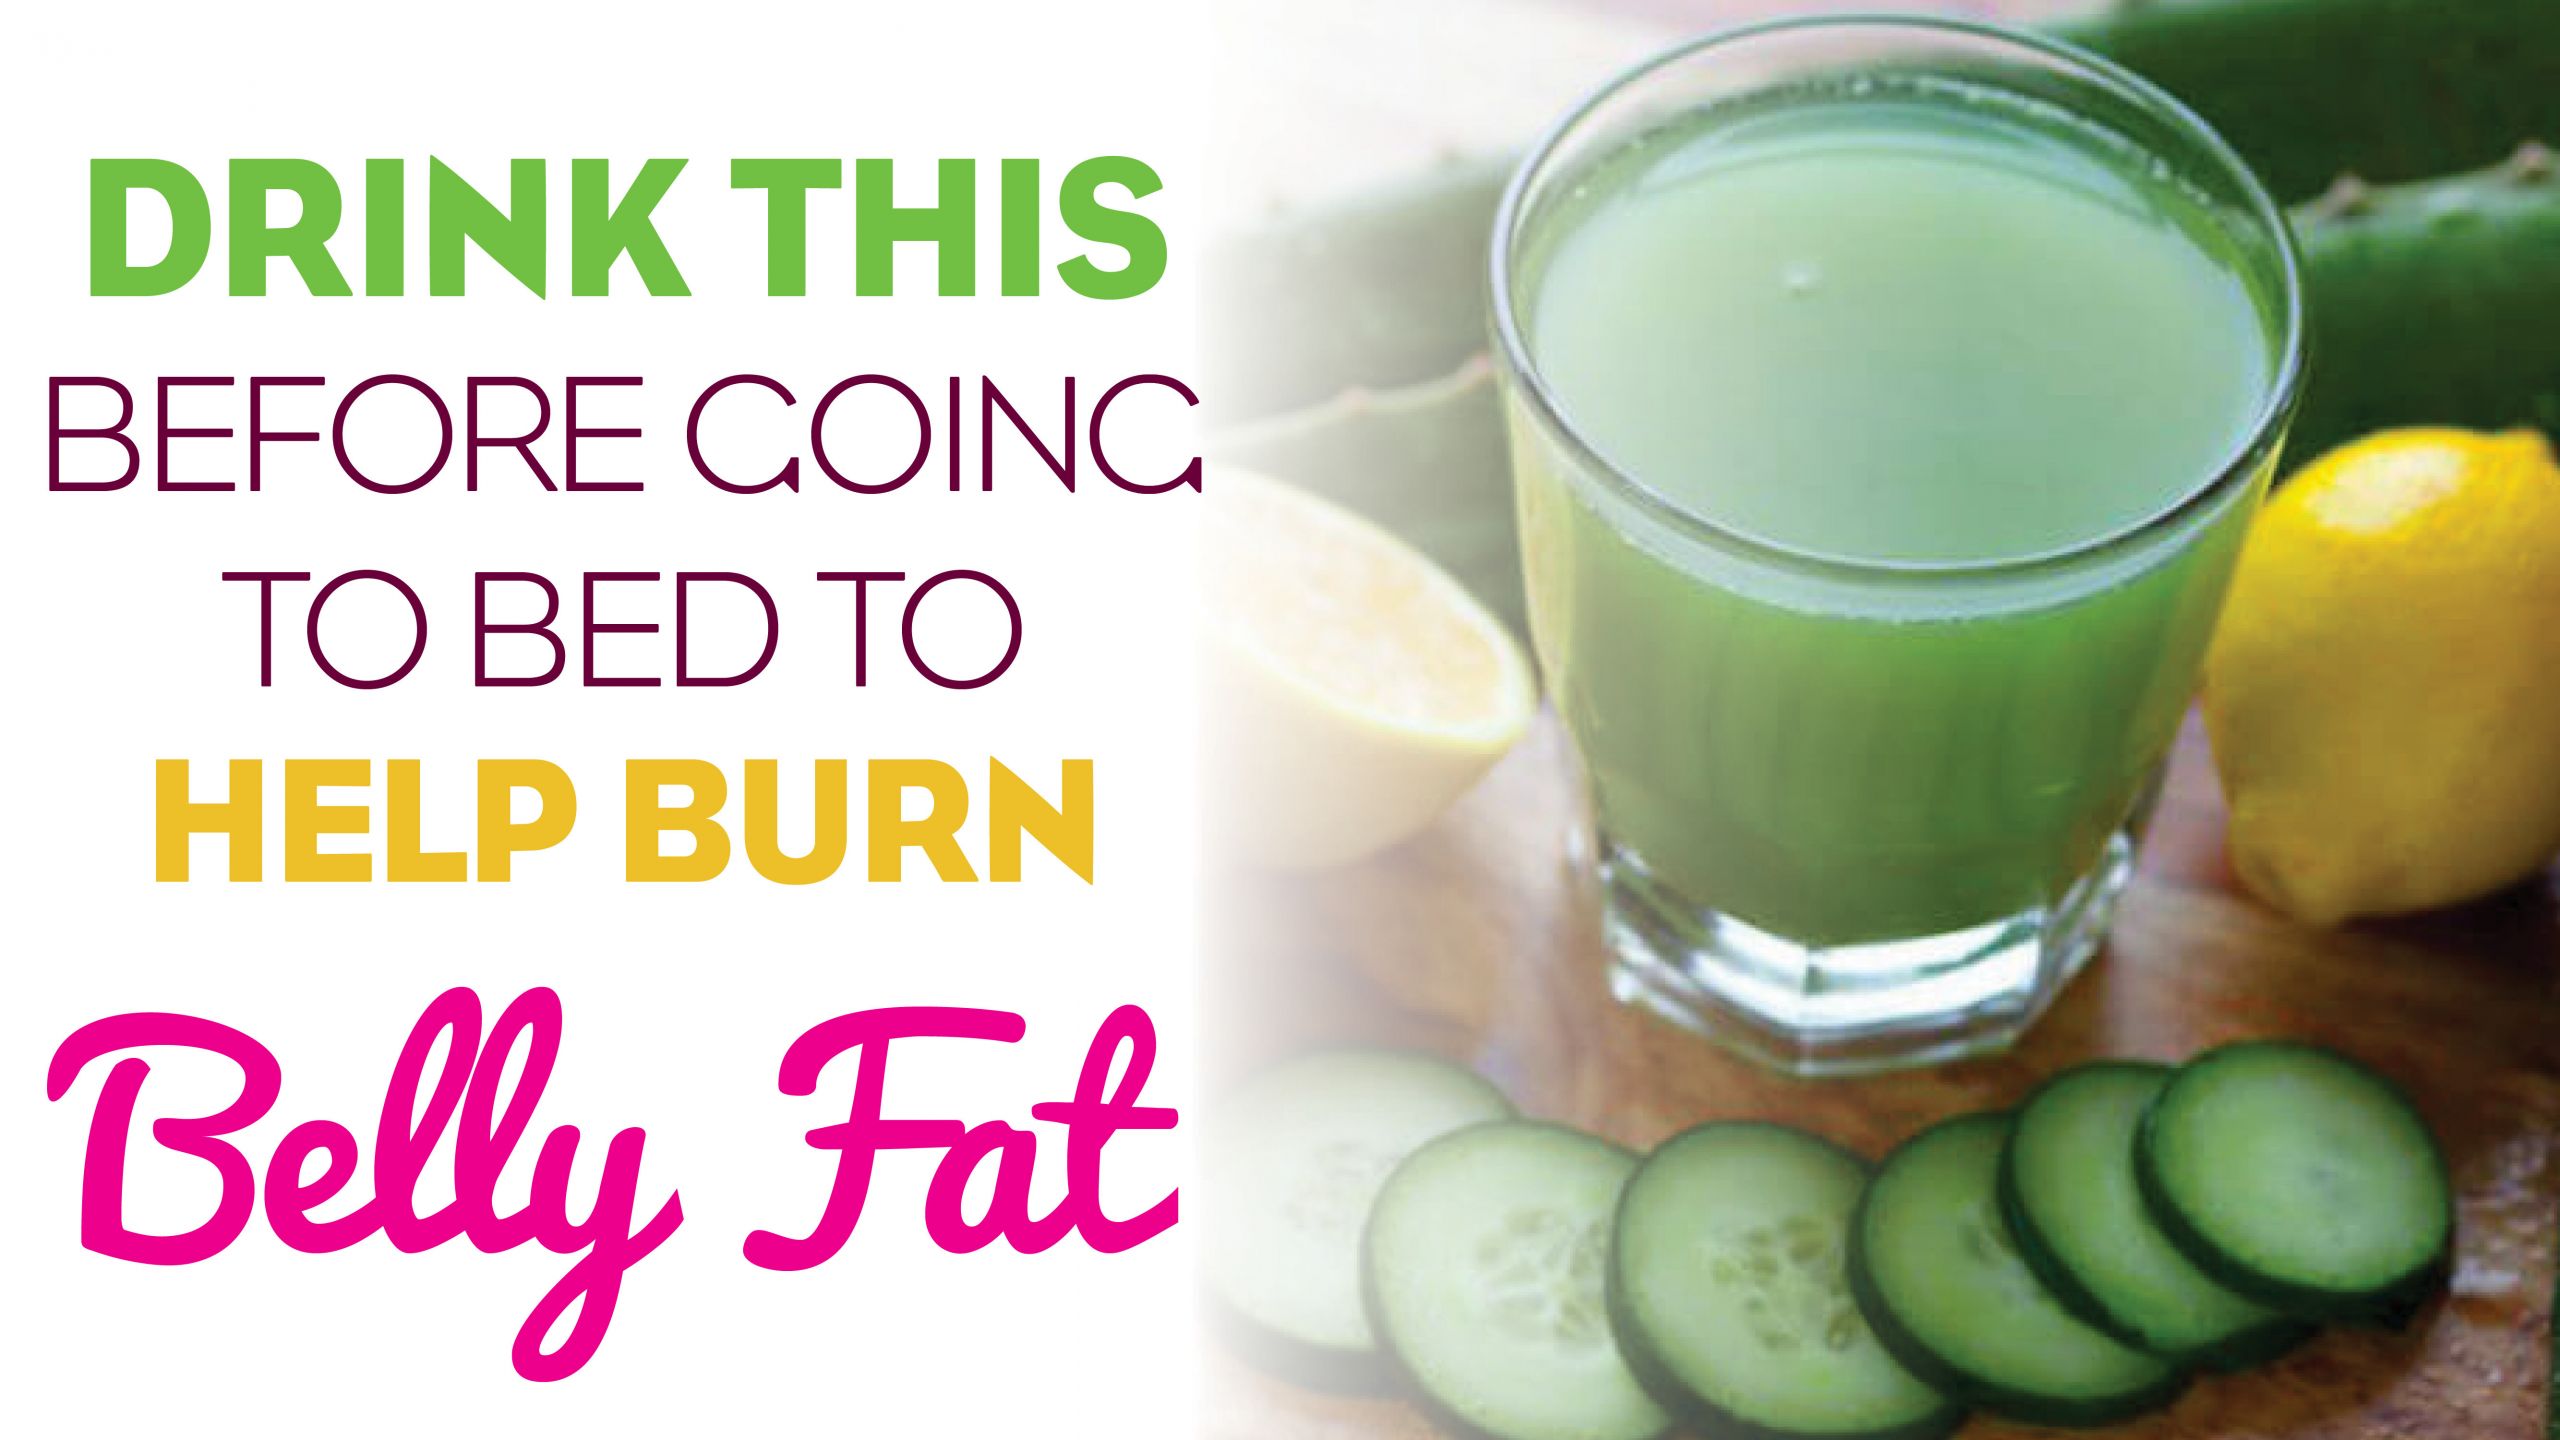 Burn Belly Fat Drinks
 Drink this Fat Burning Drink Before Going to Bed and Burn